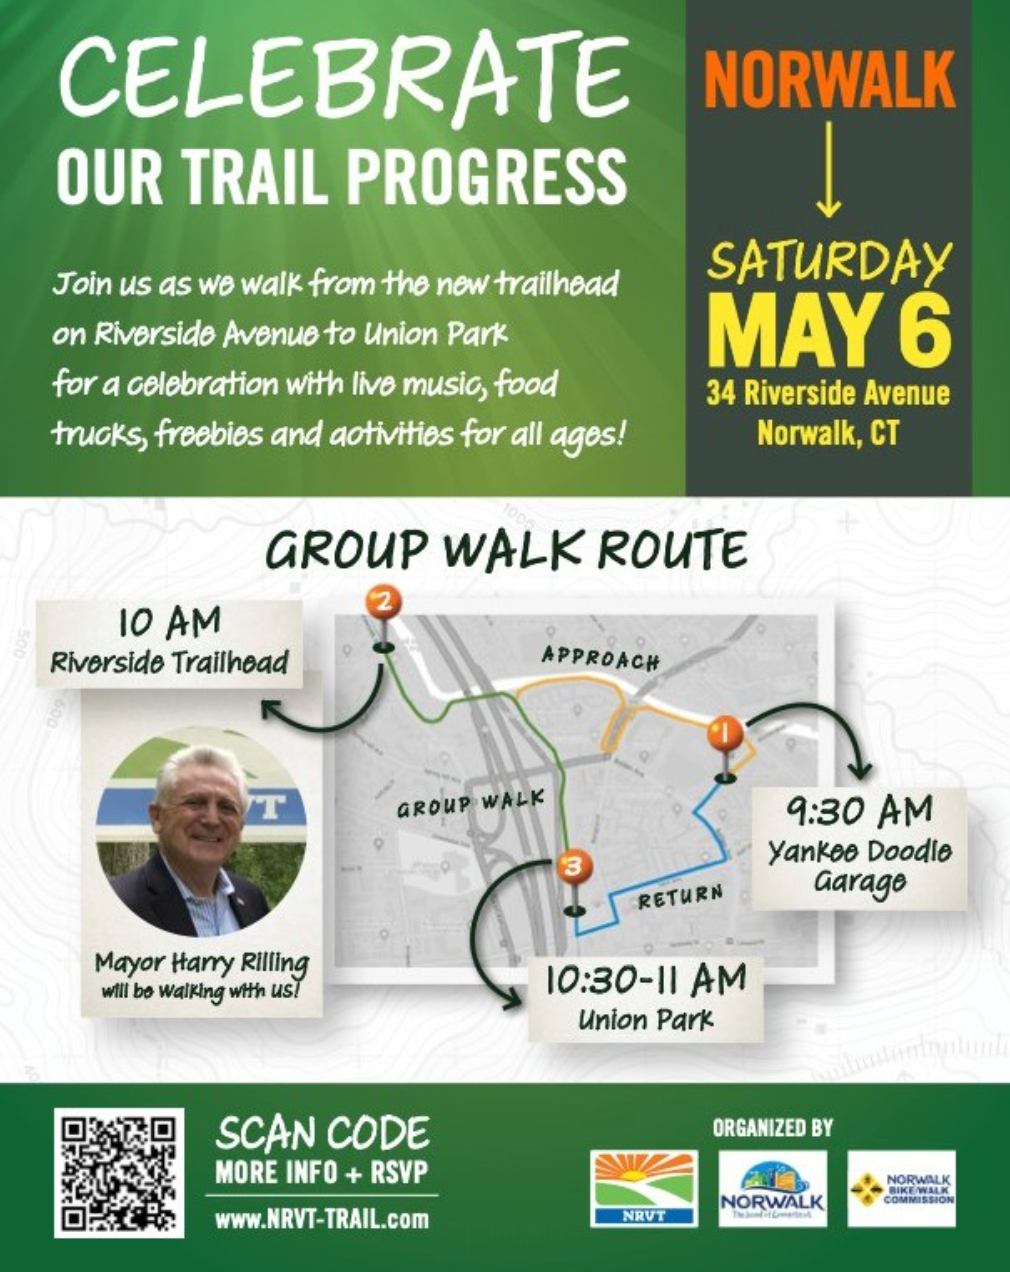 An image highlighting a May 6 event for the Norwalk River Valley Trail